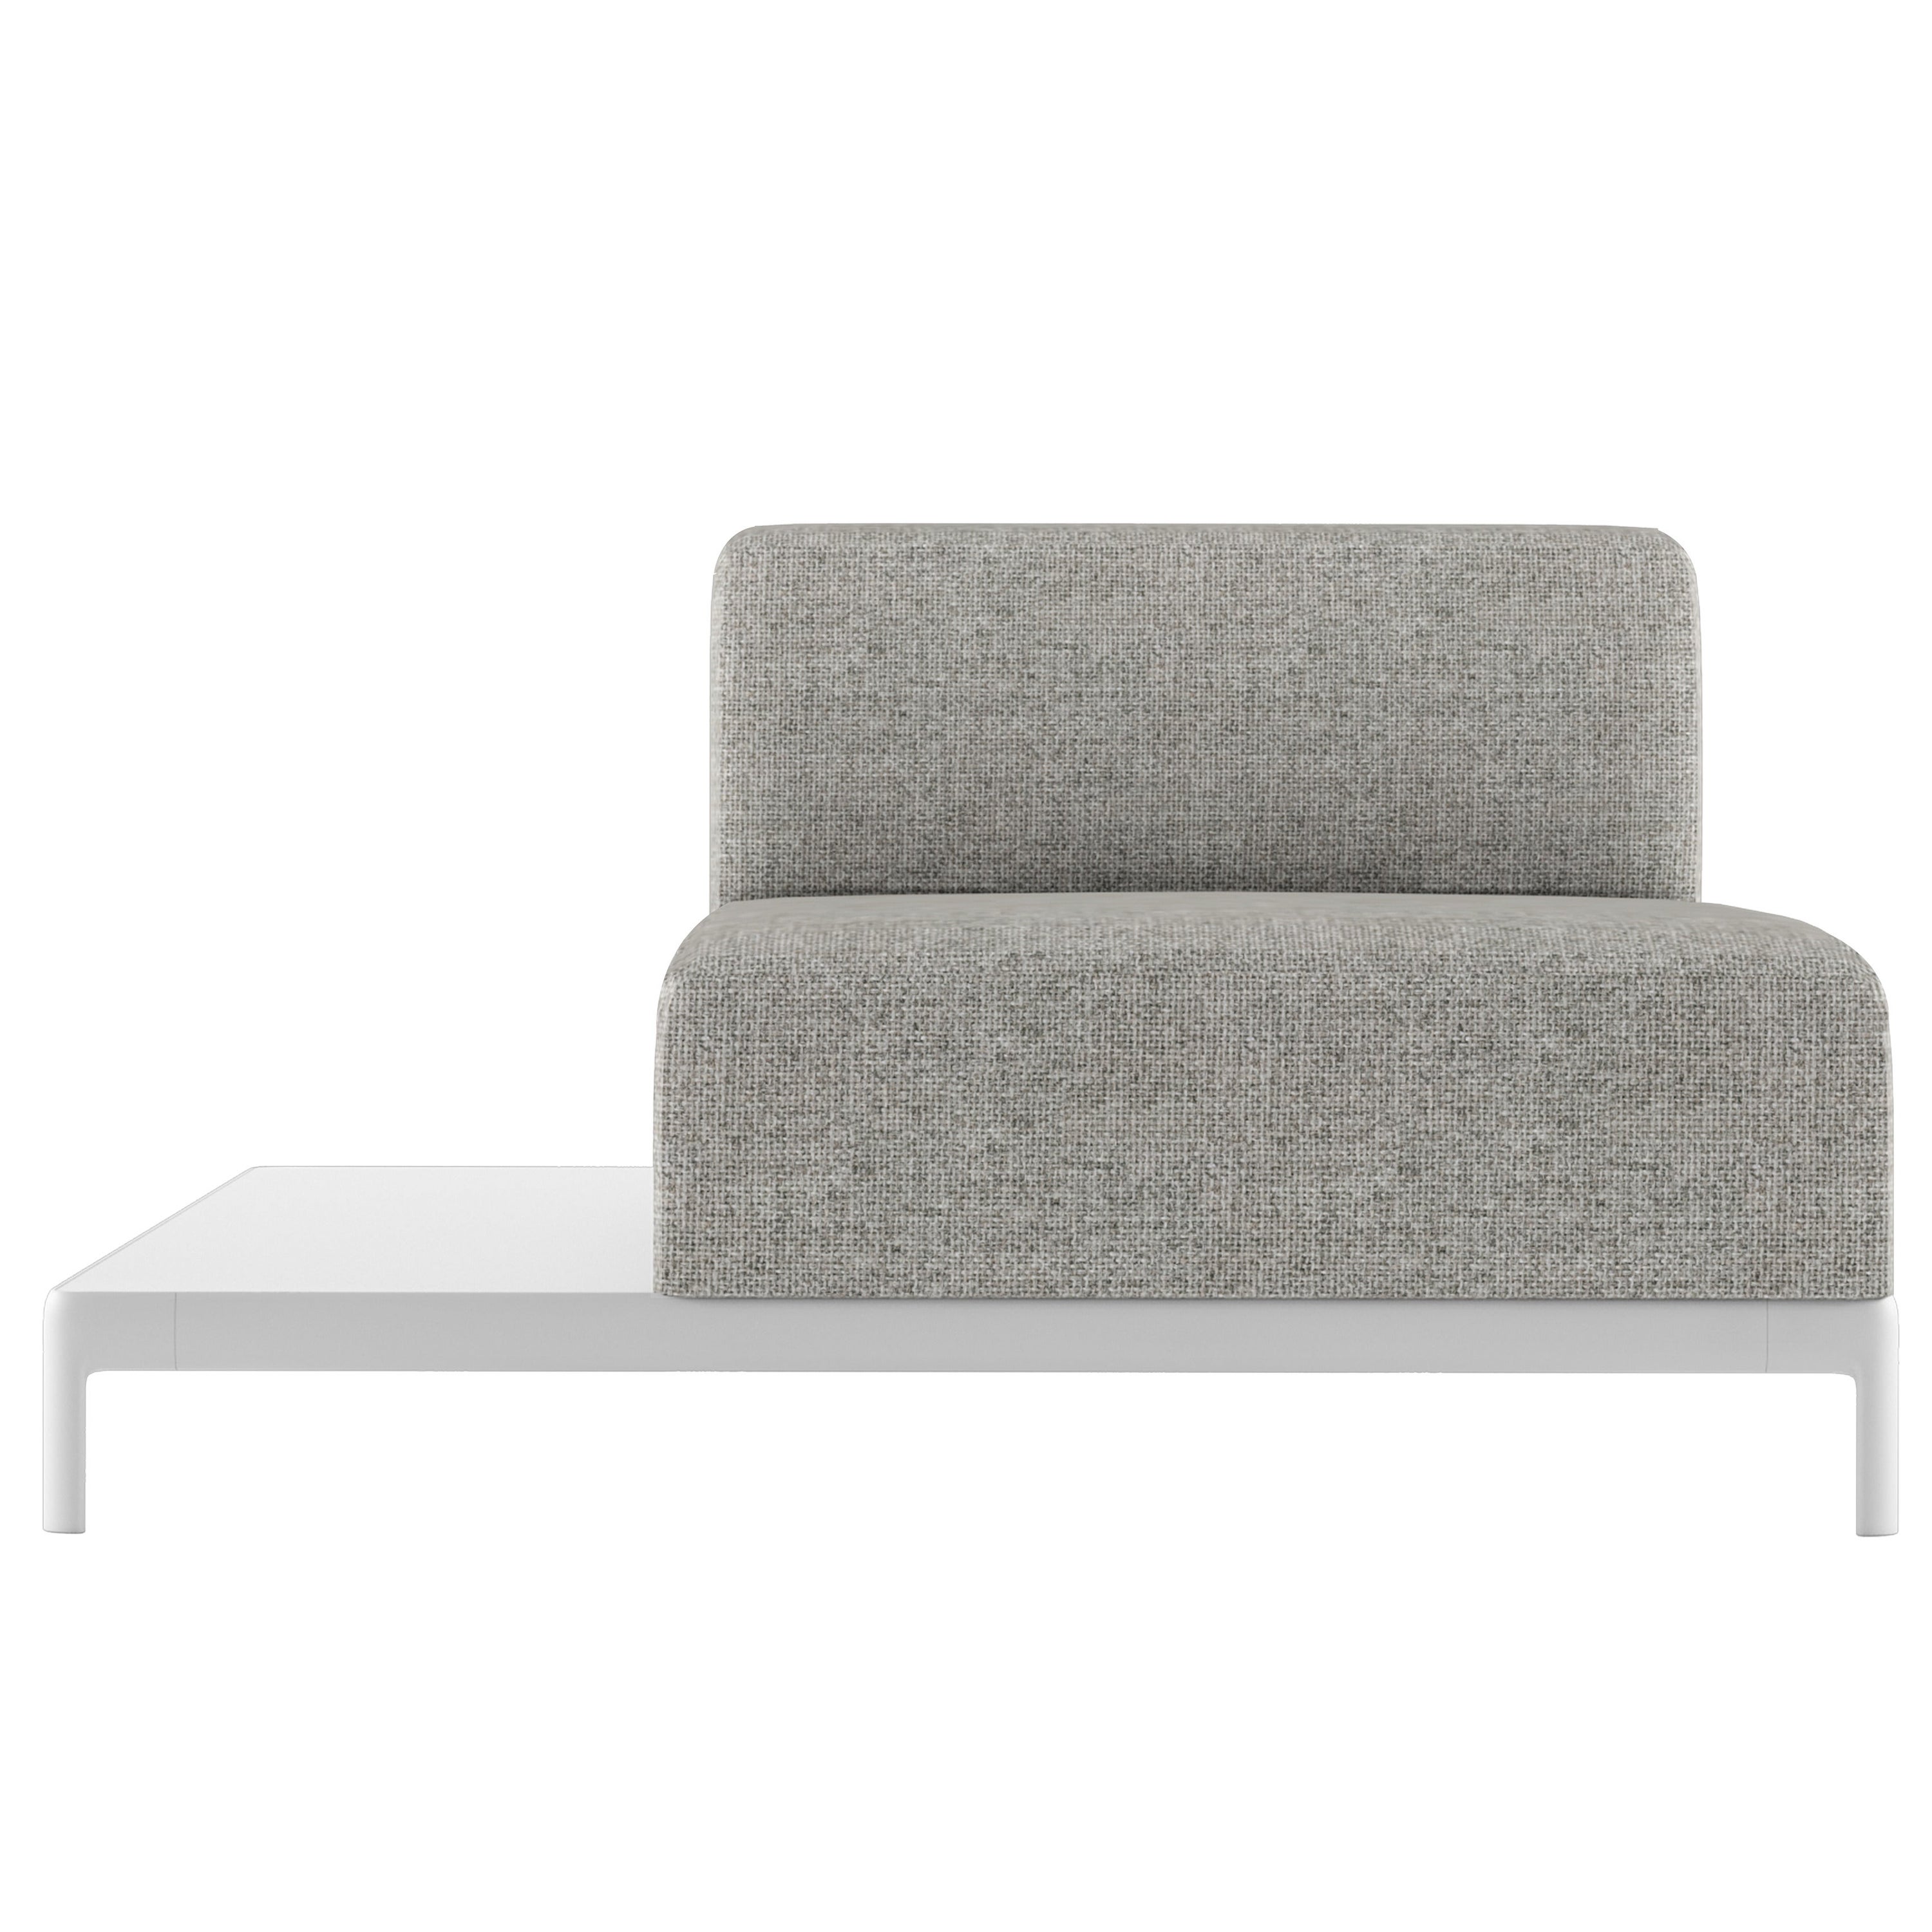 Alias P68 AluZen Soft Top Outdoor Sofa SX in Upholstery with Aluminium Frame For Sale